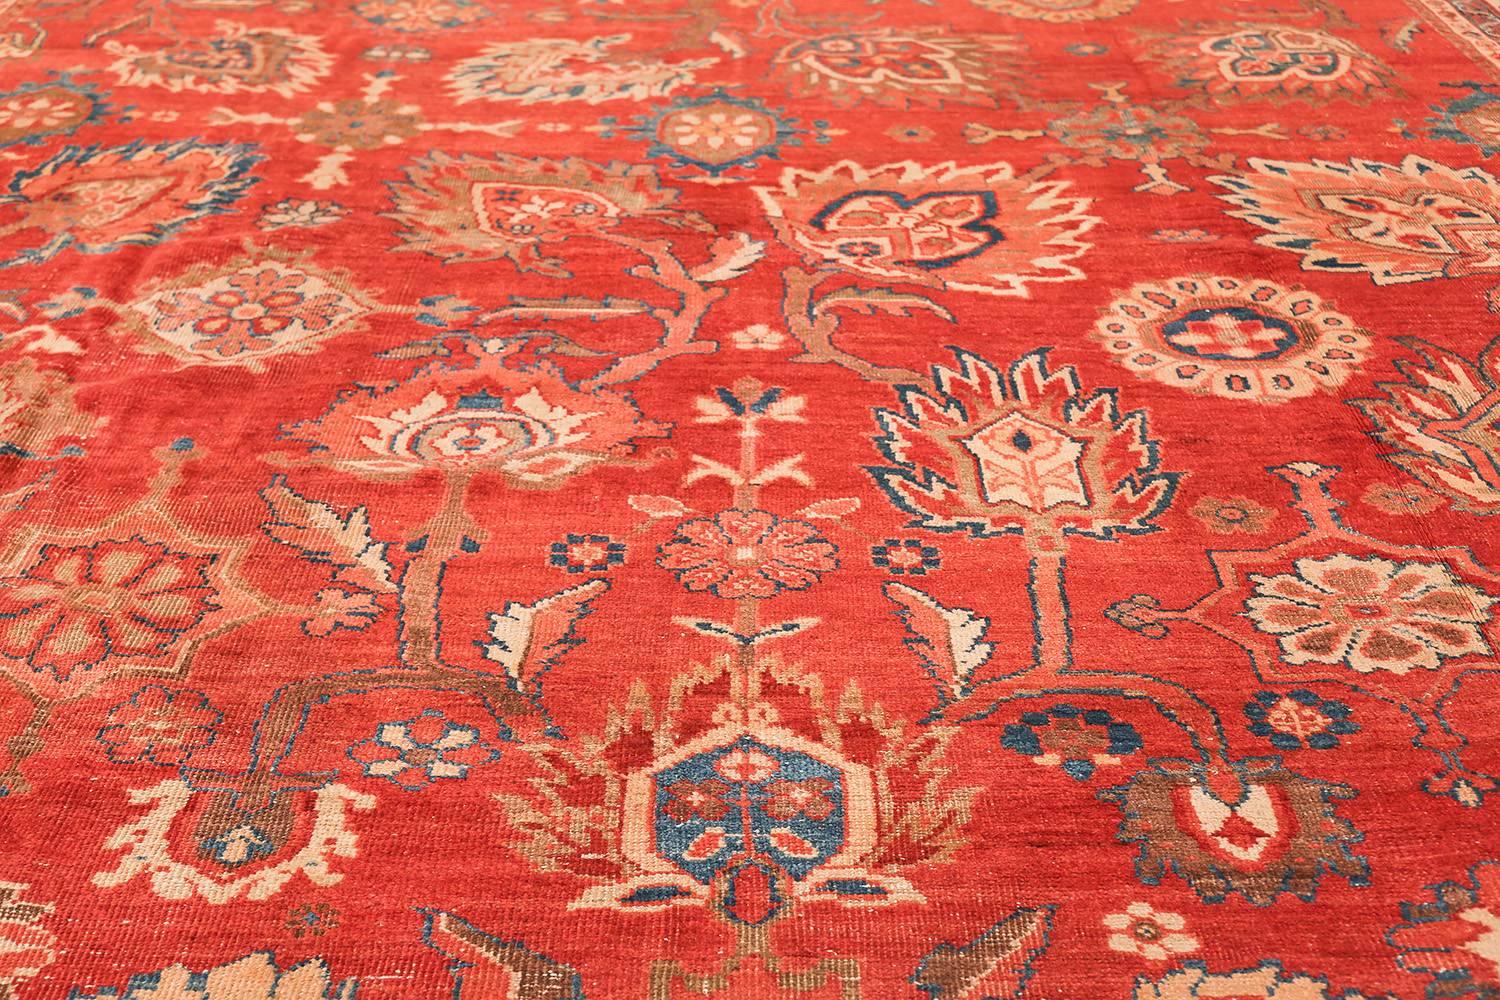 Largw Oversize Red Antique Persian Sultanabad Rug. Size: 14 ft x 21 ft 2